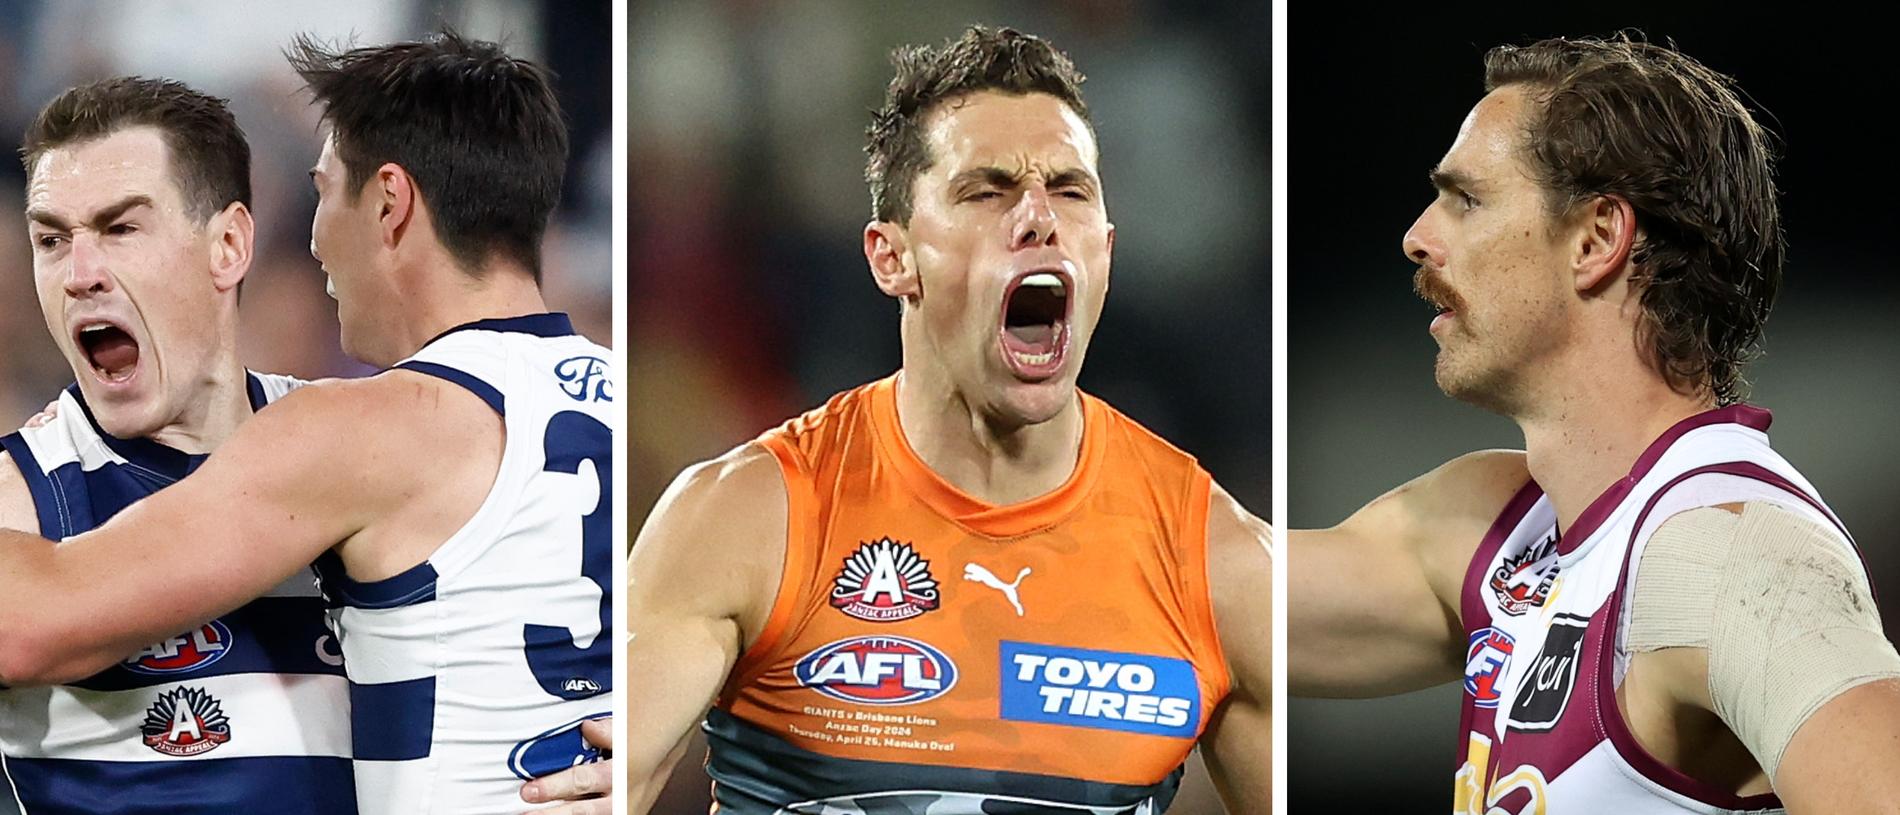 Check out the AFL Power Rankings after Round 7.